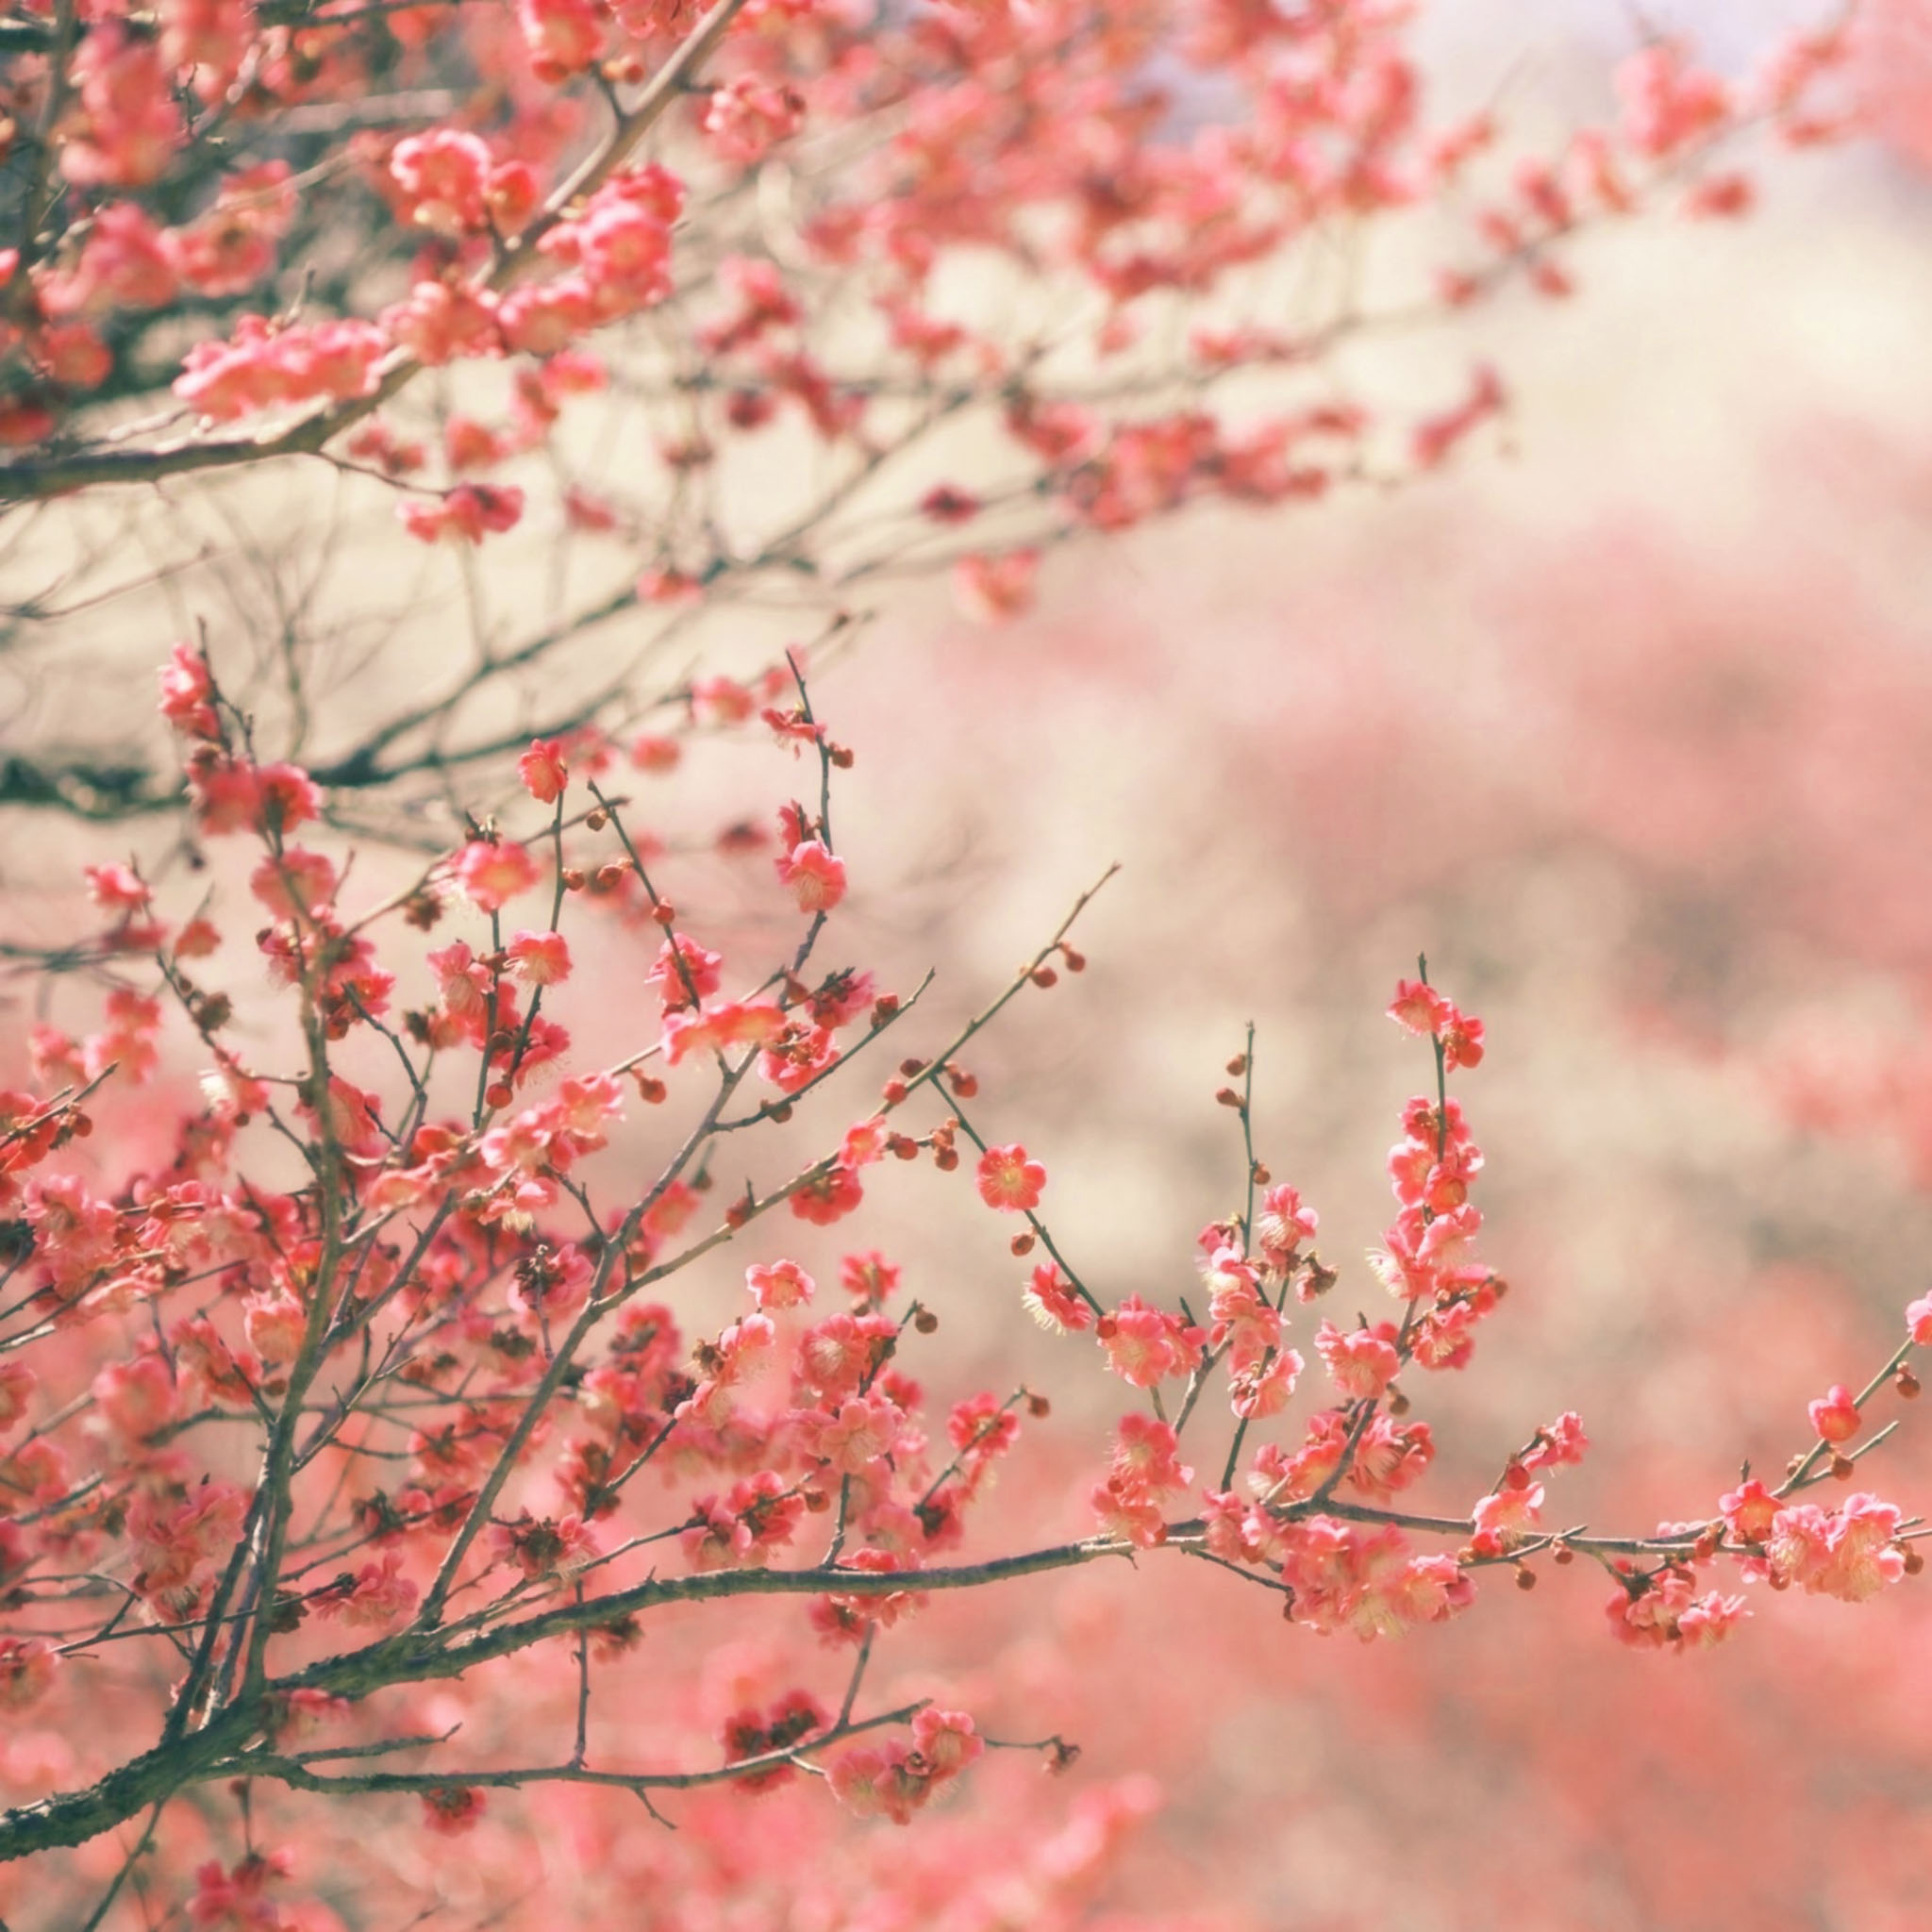 A branch of a tree with pink flowers - Spring